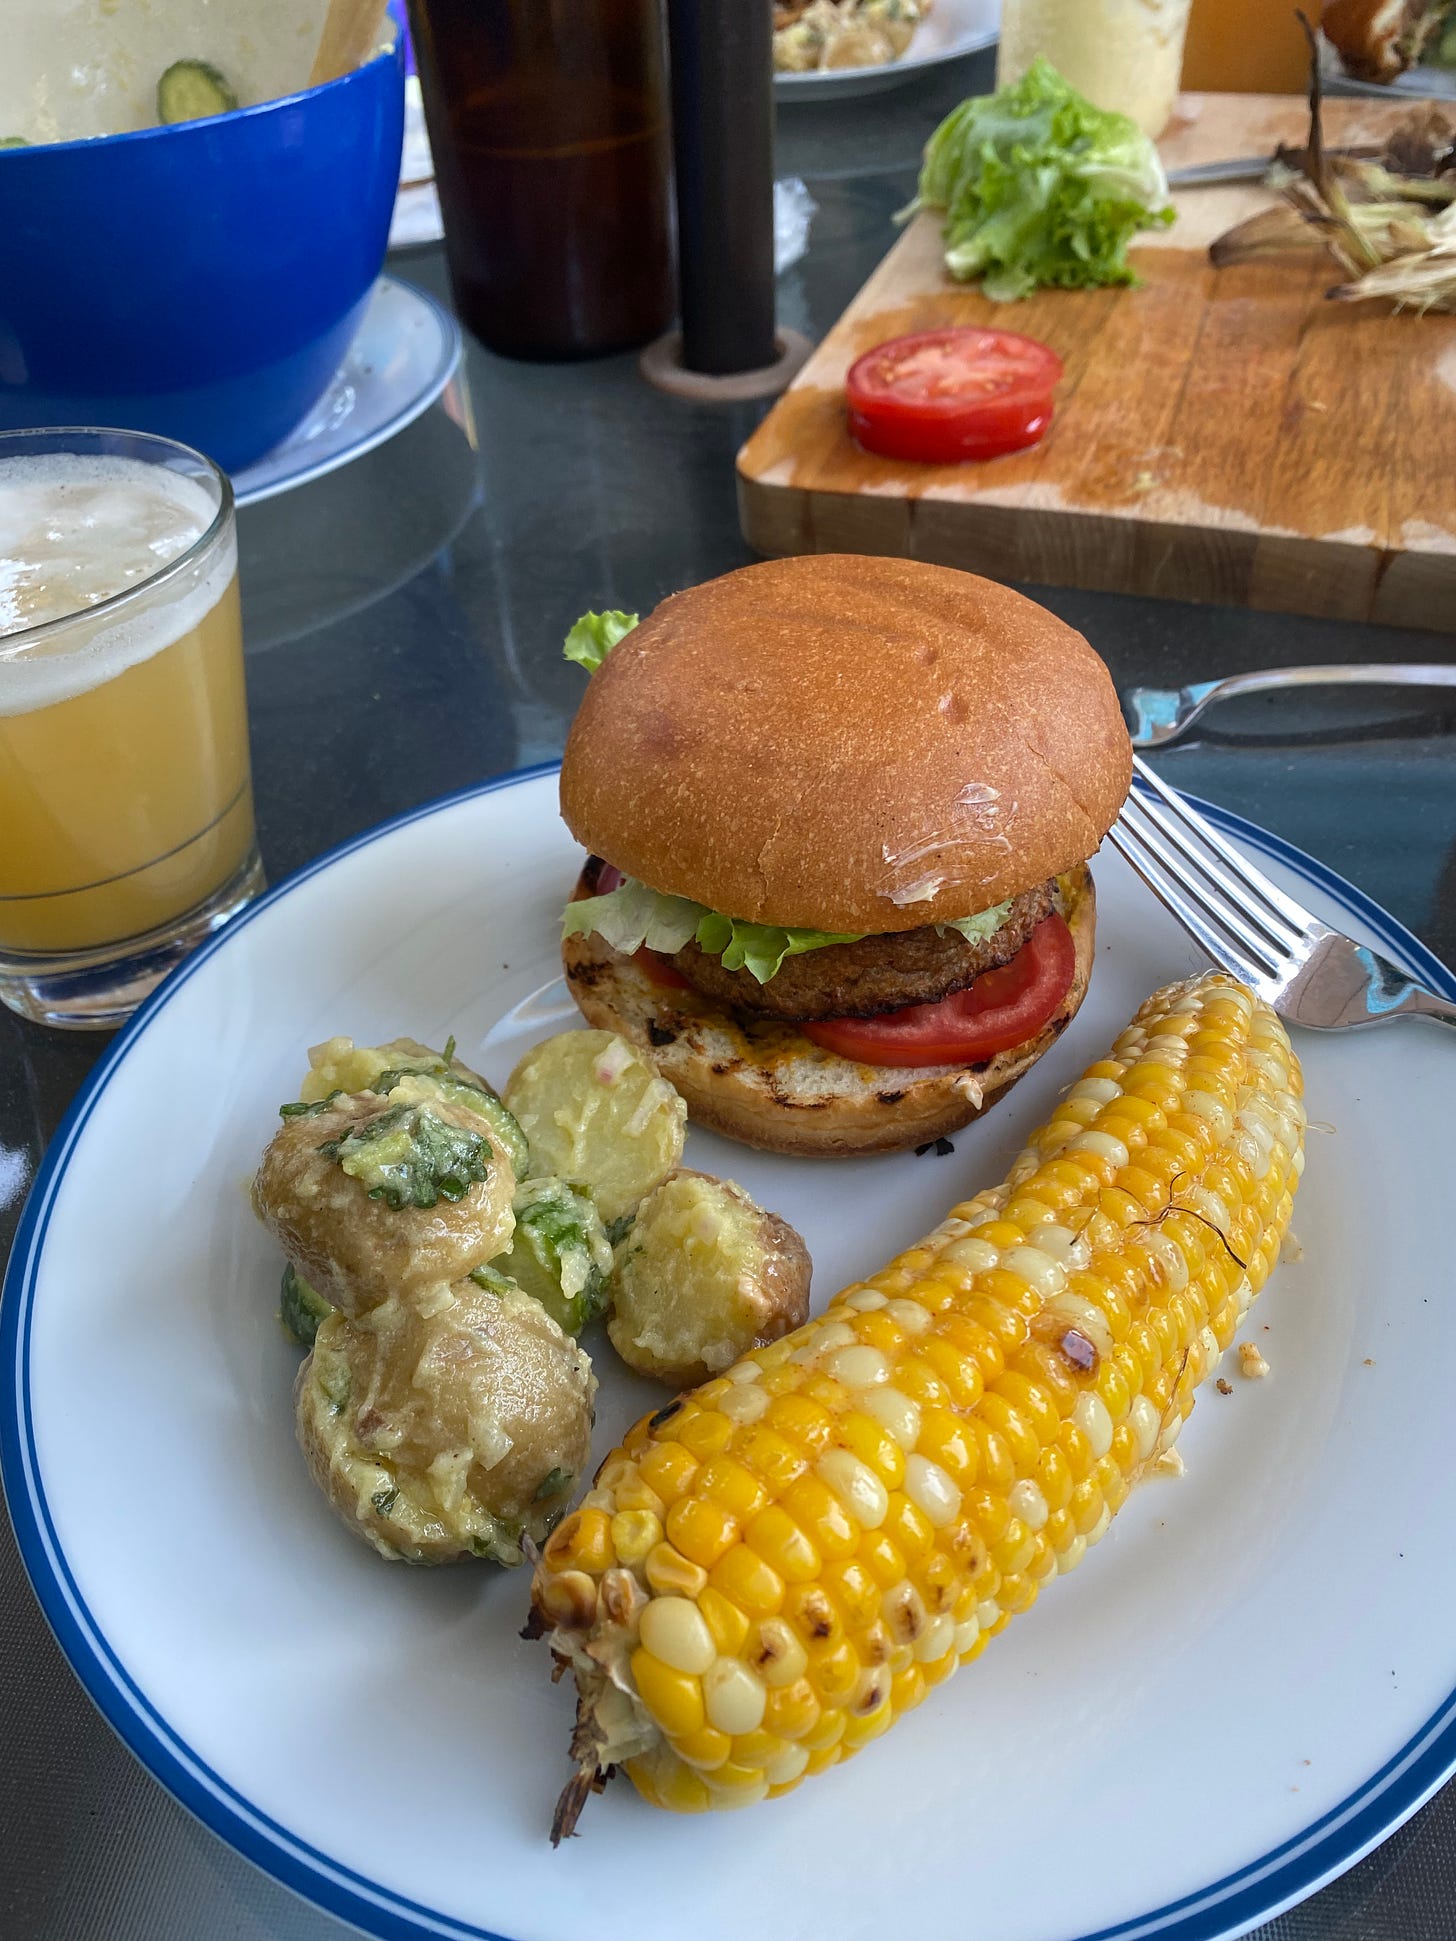 A white plate on a busy outdoor table with dishes and a cutting board in the background. On the plate are a grilled and buttered ear of corn, a small pile of skin-on german potato salad, and a veggie burger on a brioche bun with tomato and lettuce visible. A glass of hazy beer sits next to the plate.